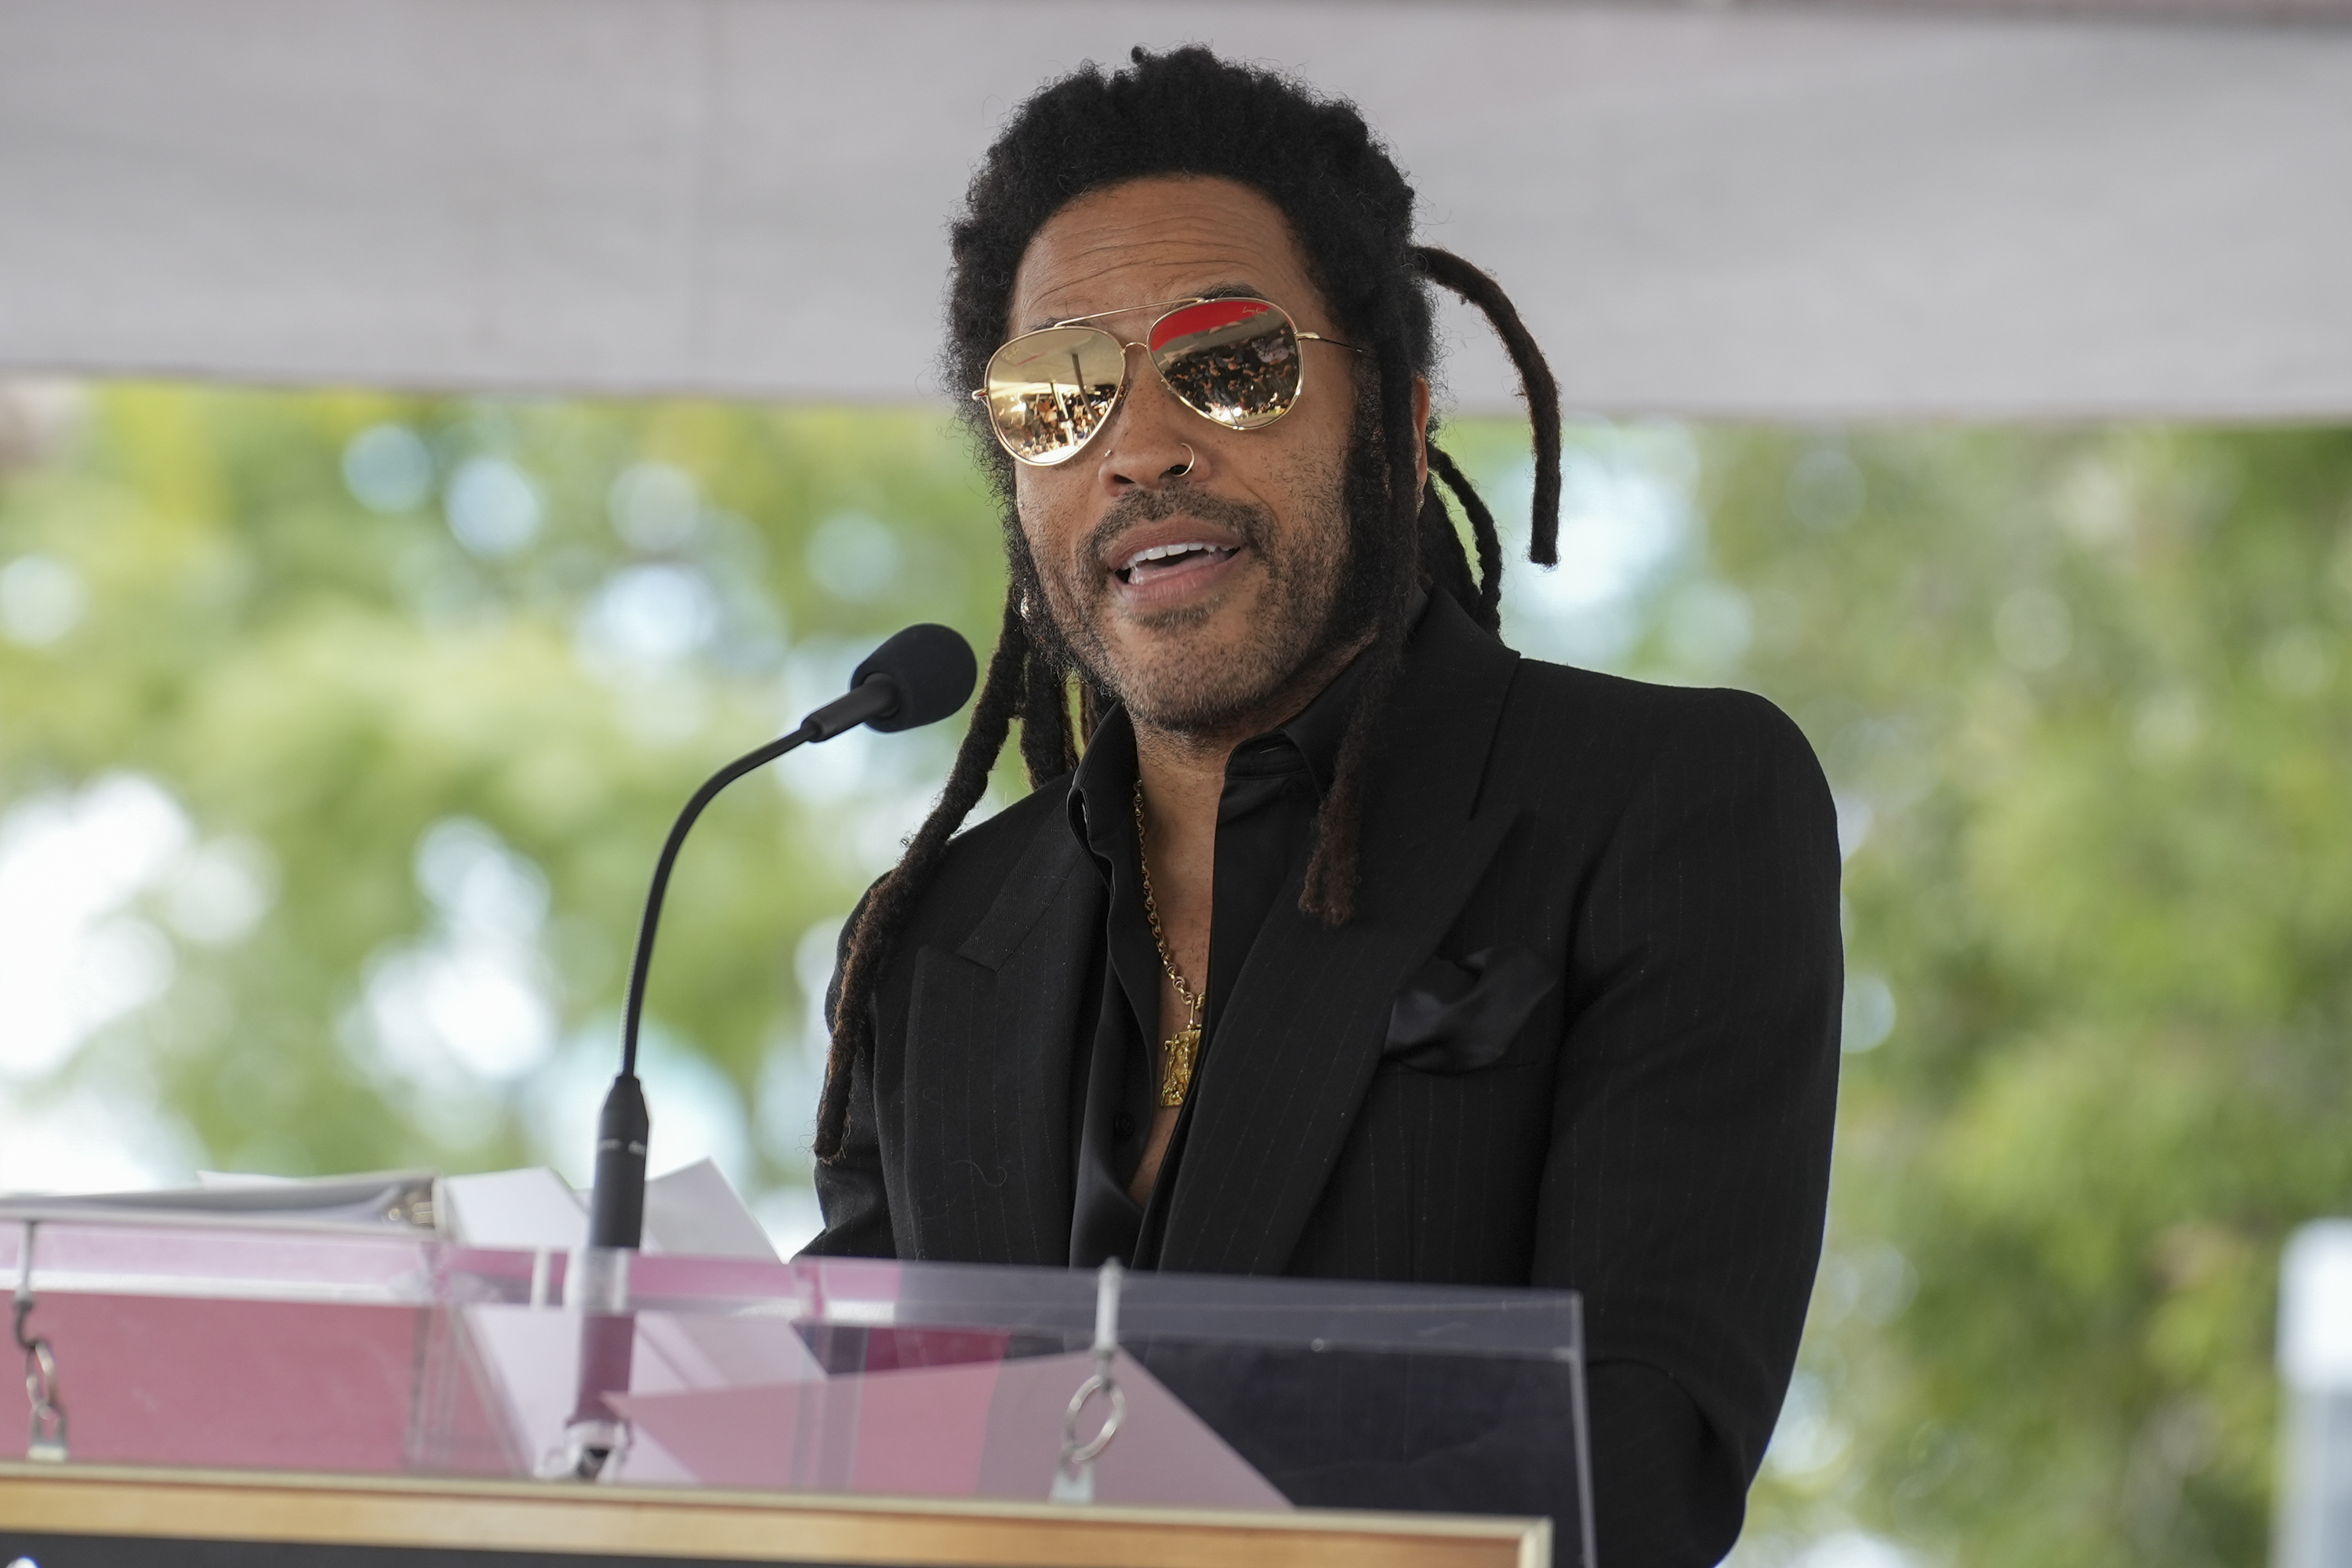 Lenny Kravitz wearing a suit and aviator sunglasses, speaks at a podium